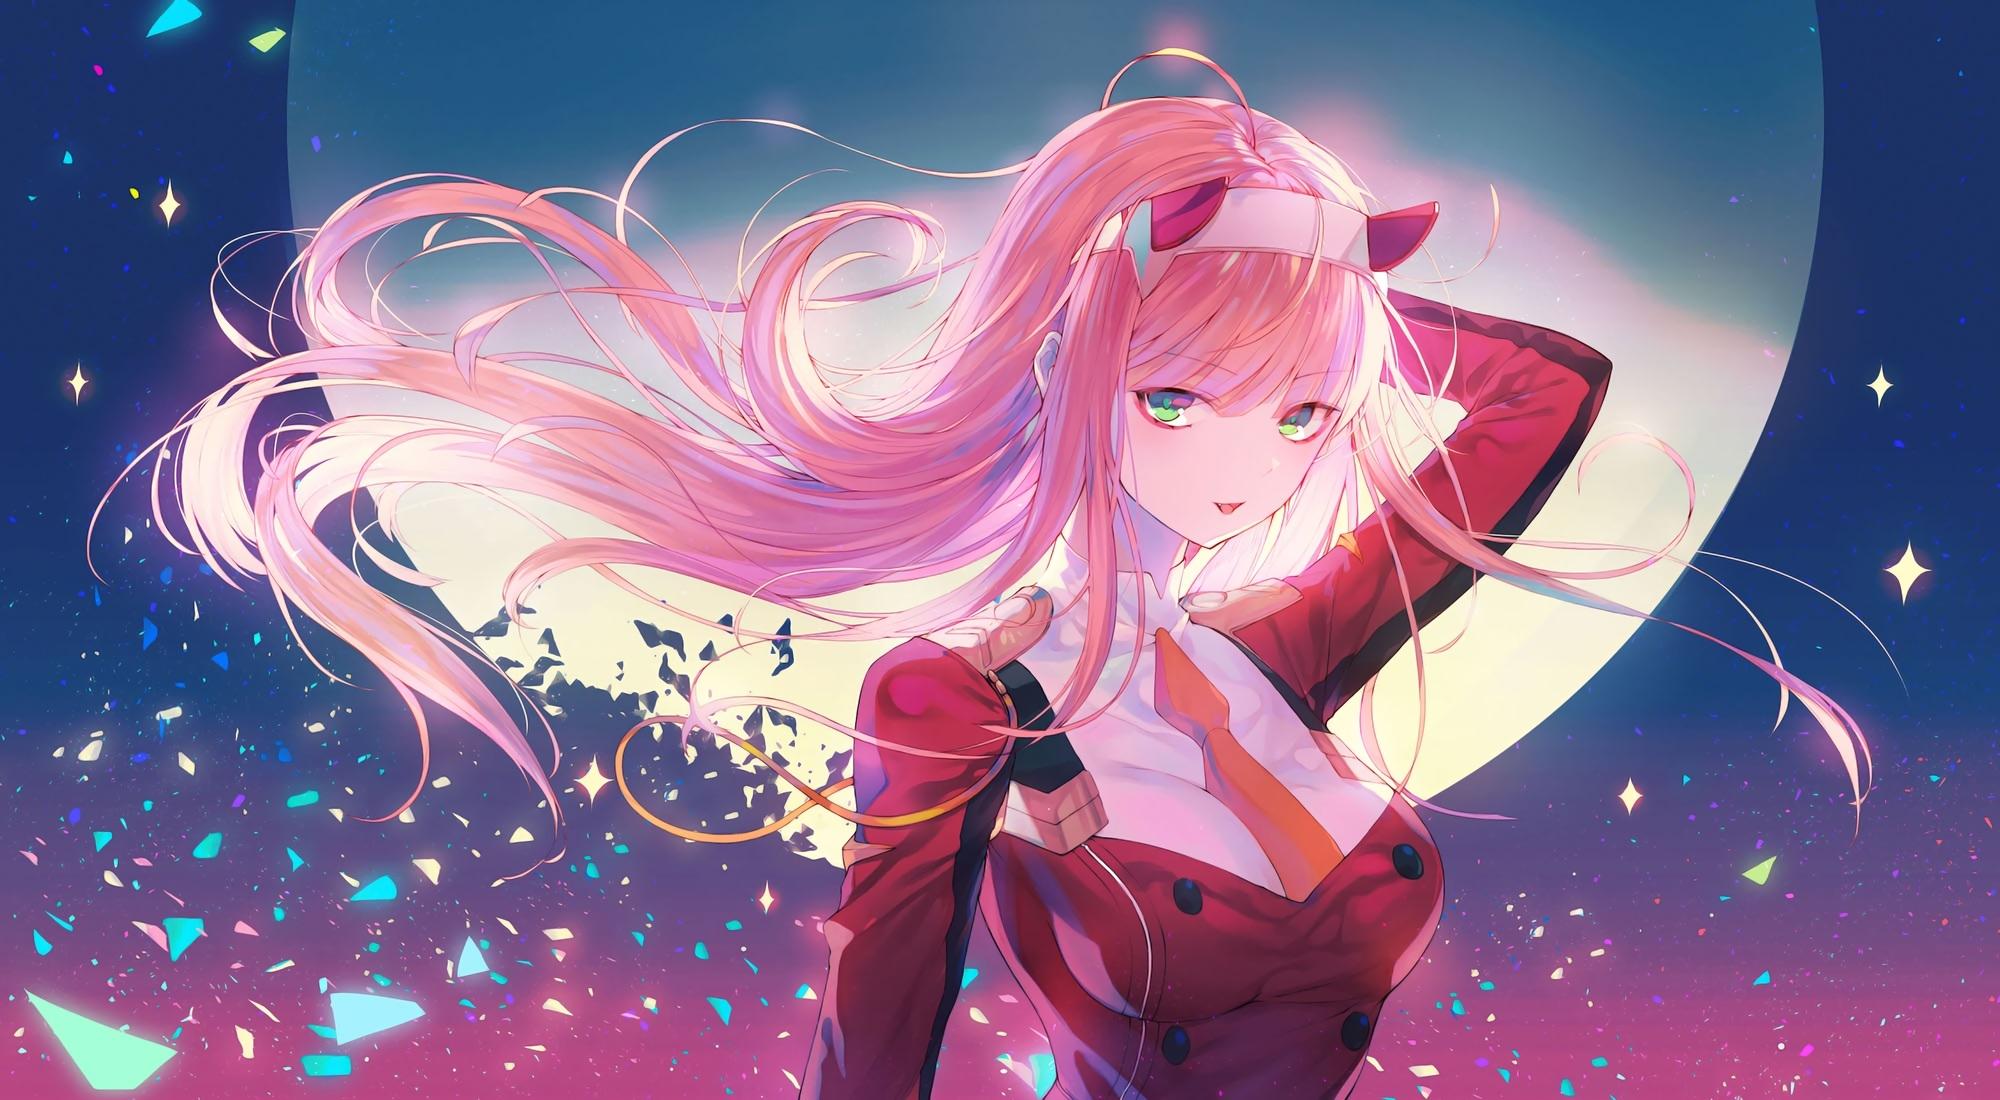 Download 2000x1100 Darling In The Franxx, Zero Two, Pink